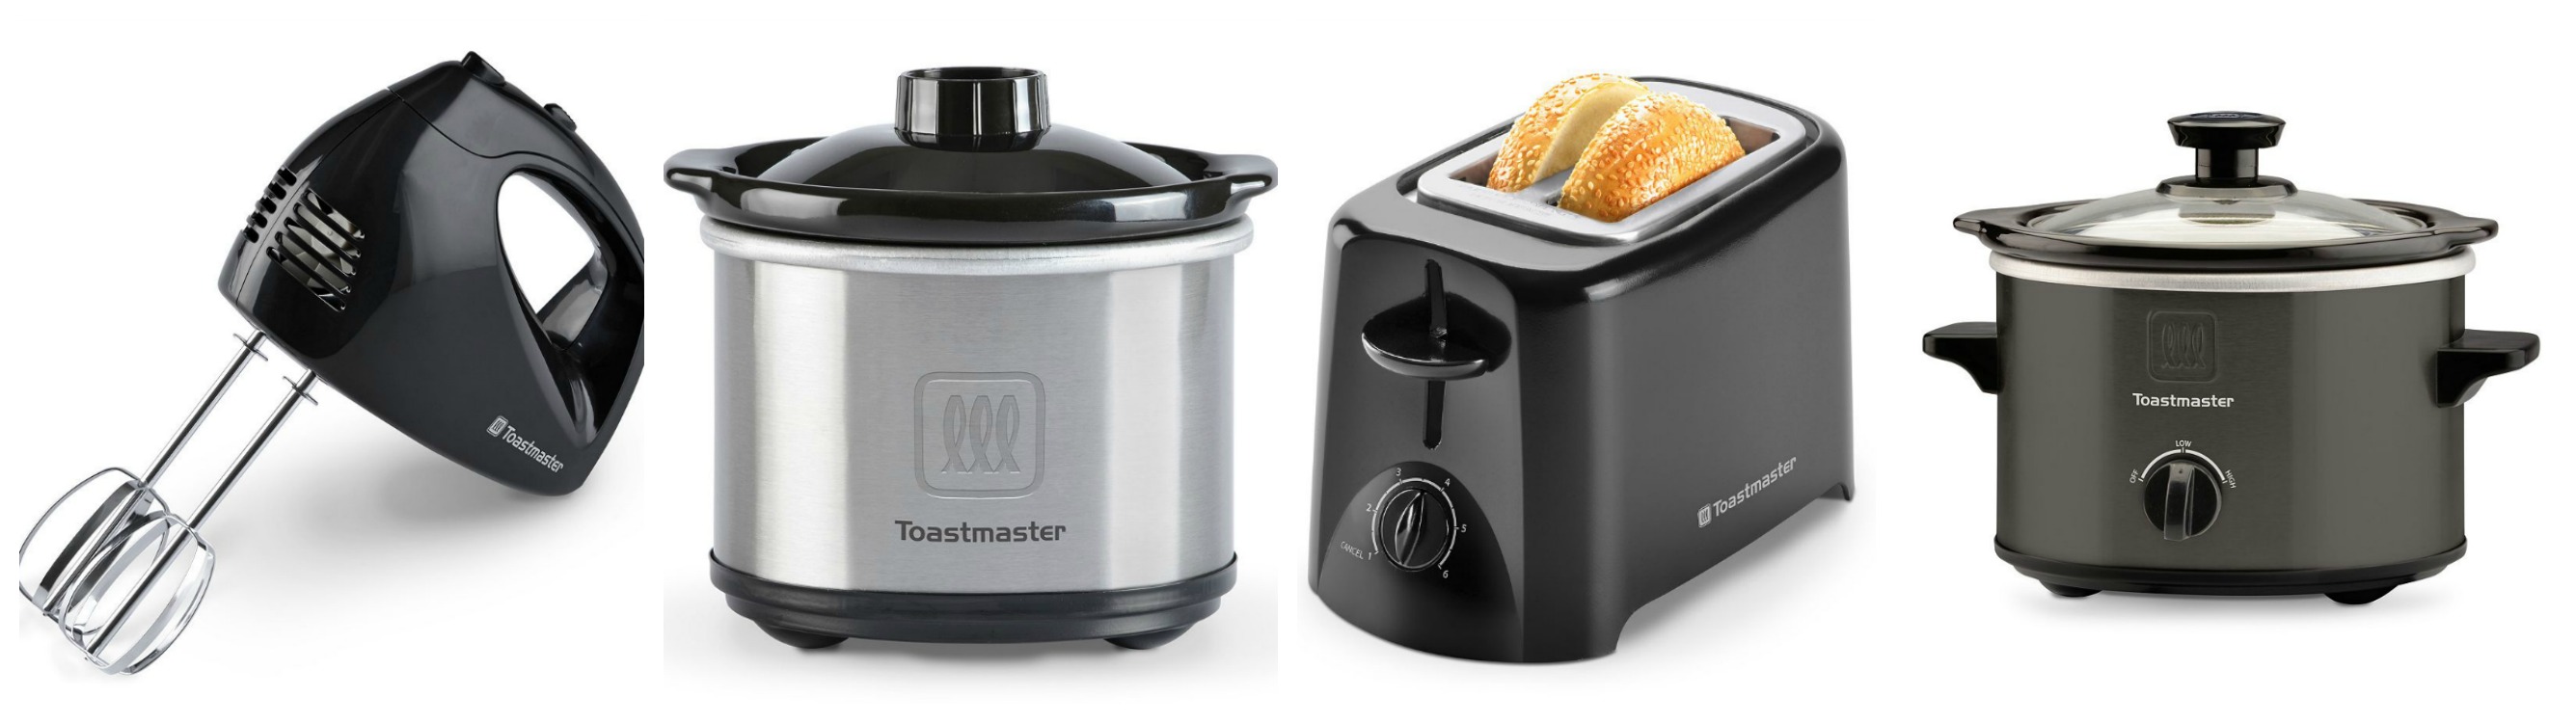 kohl-s-toastmaster-hand-mixer-toaster-slow-cooker-only-4-99-each